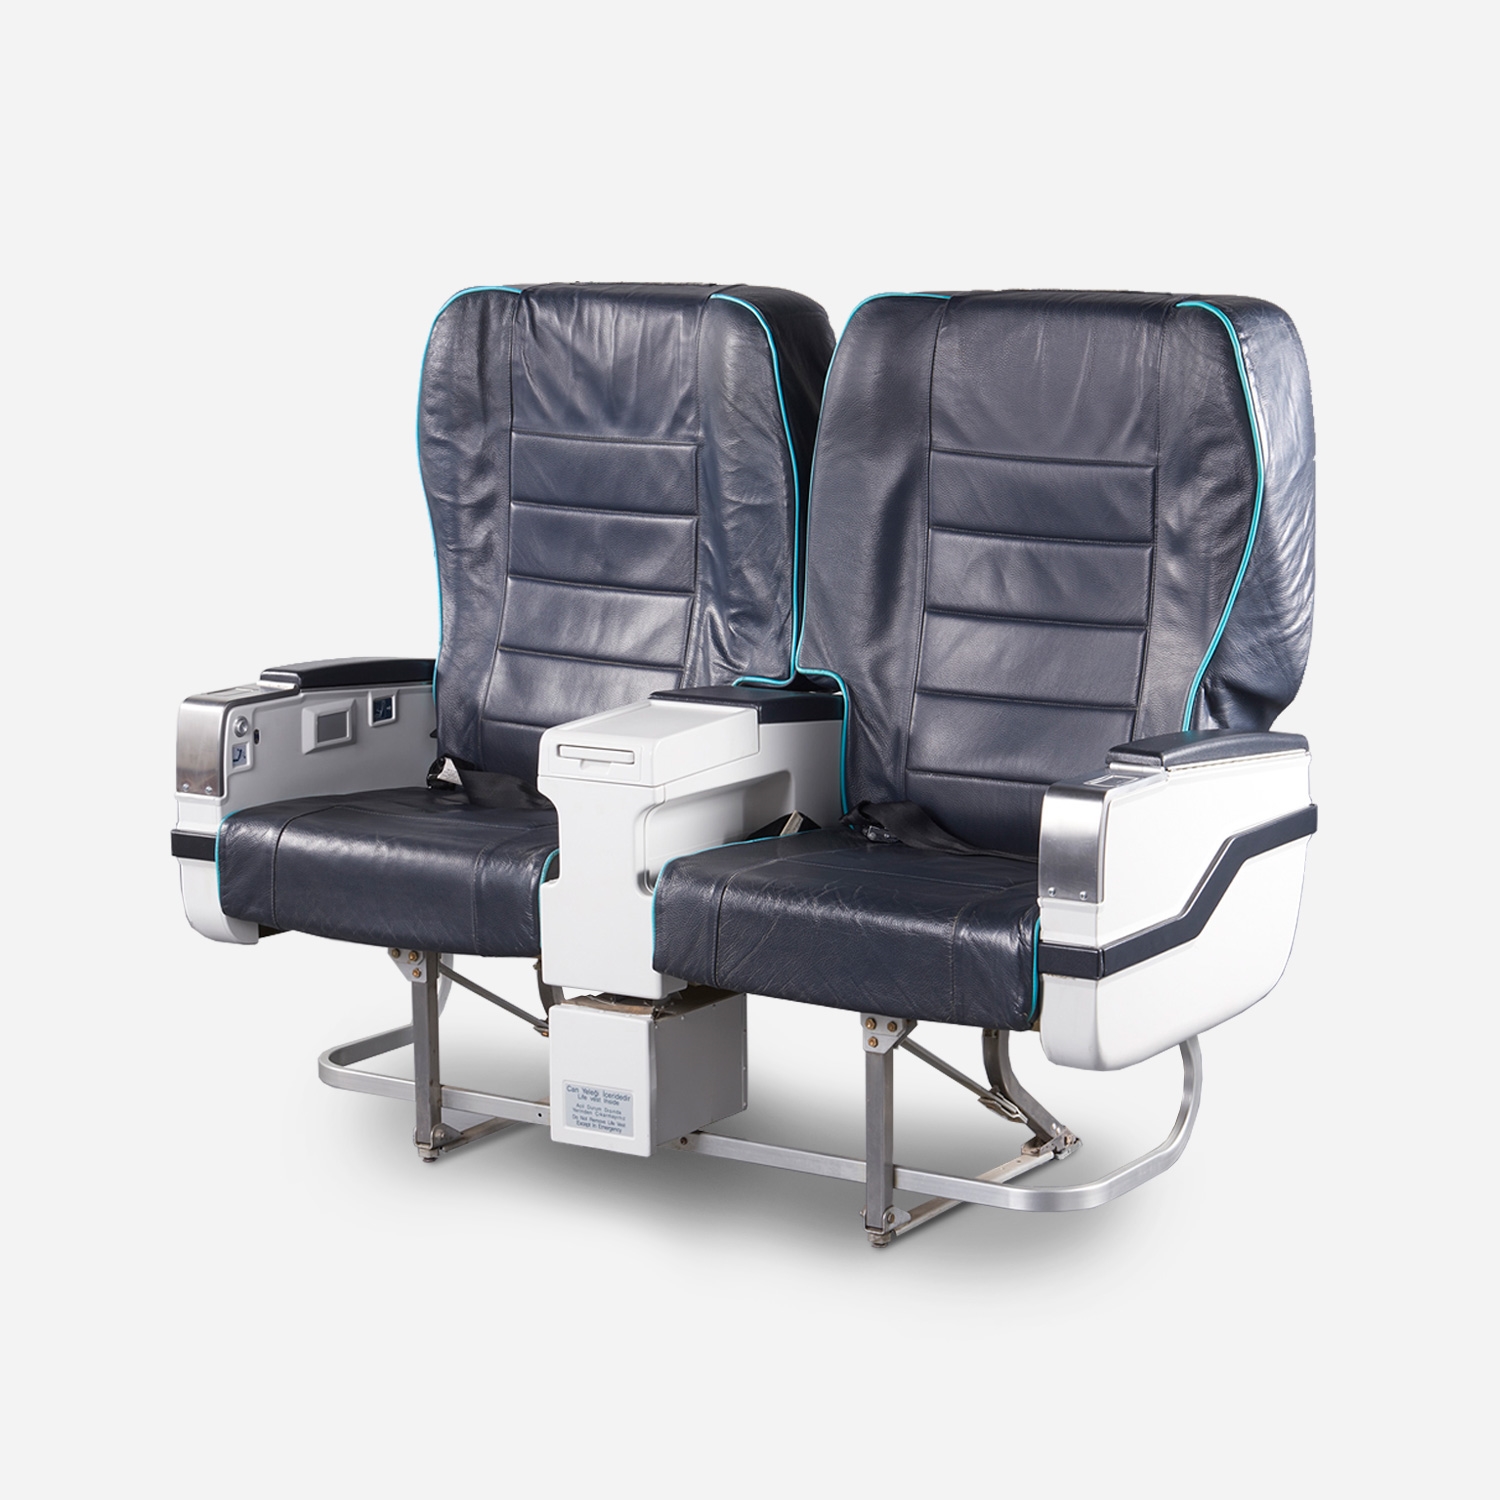 Boeing 737-800NG Business Class Seats - Authentic